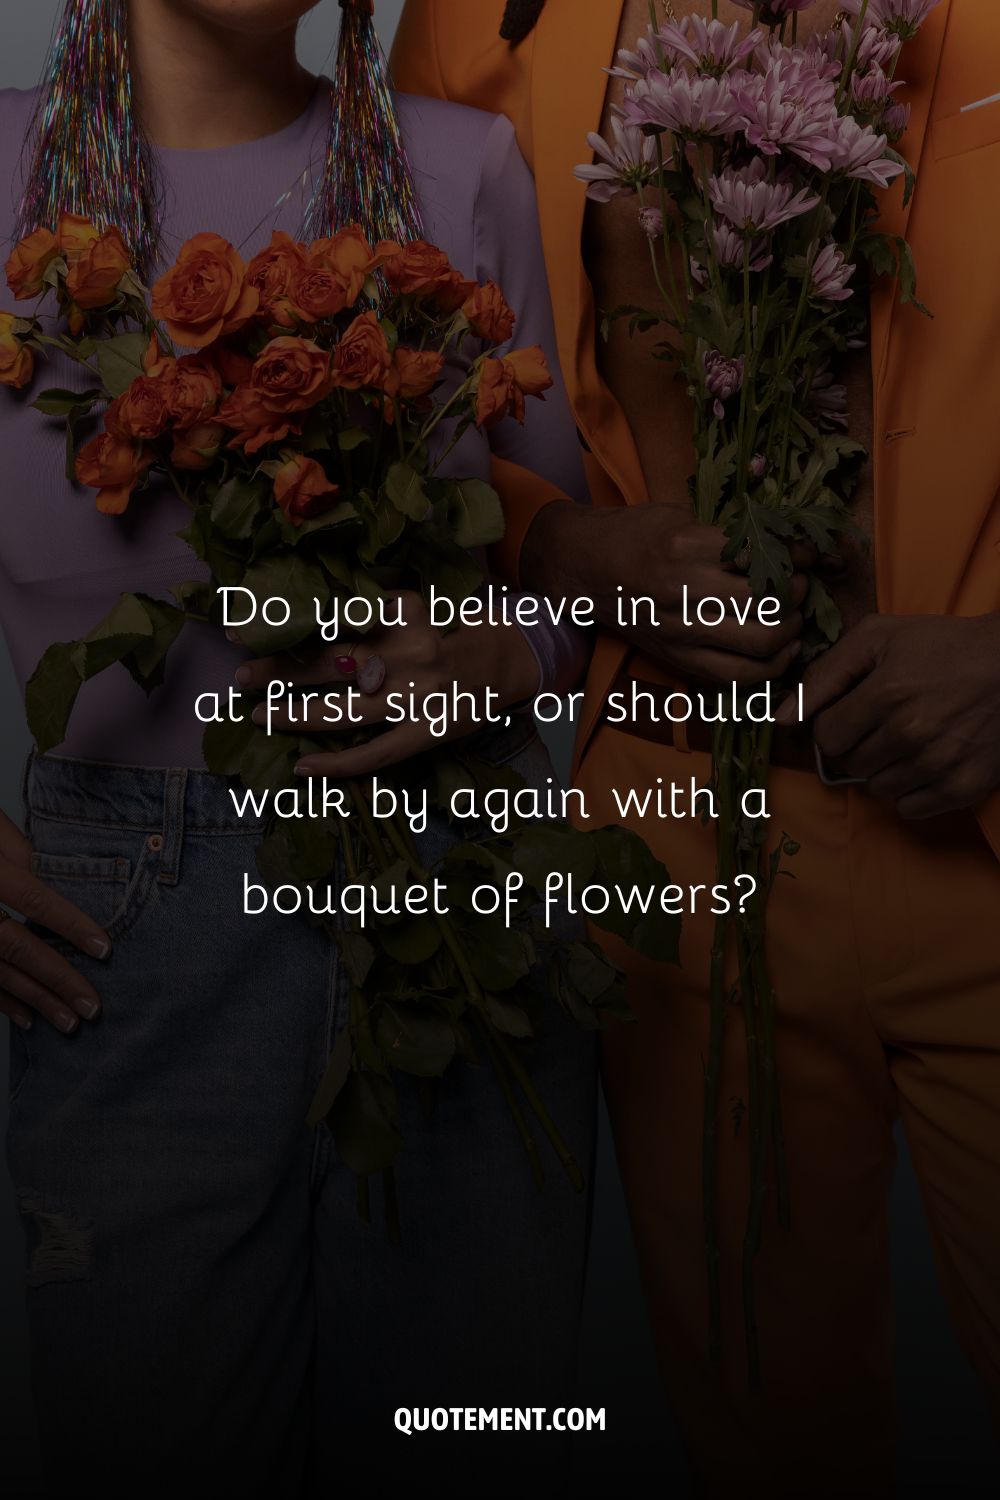 two cheerful people holding bouquets representing pick up line with flowers